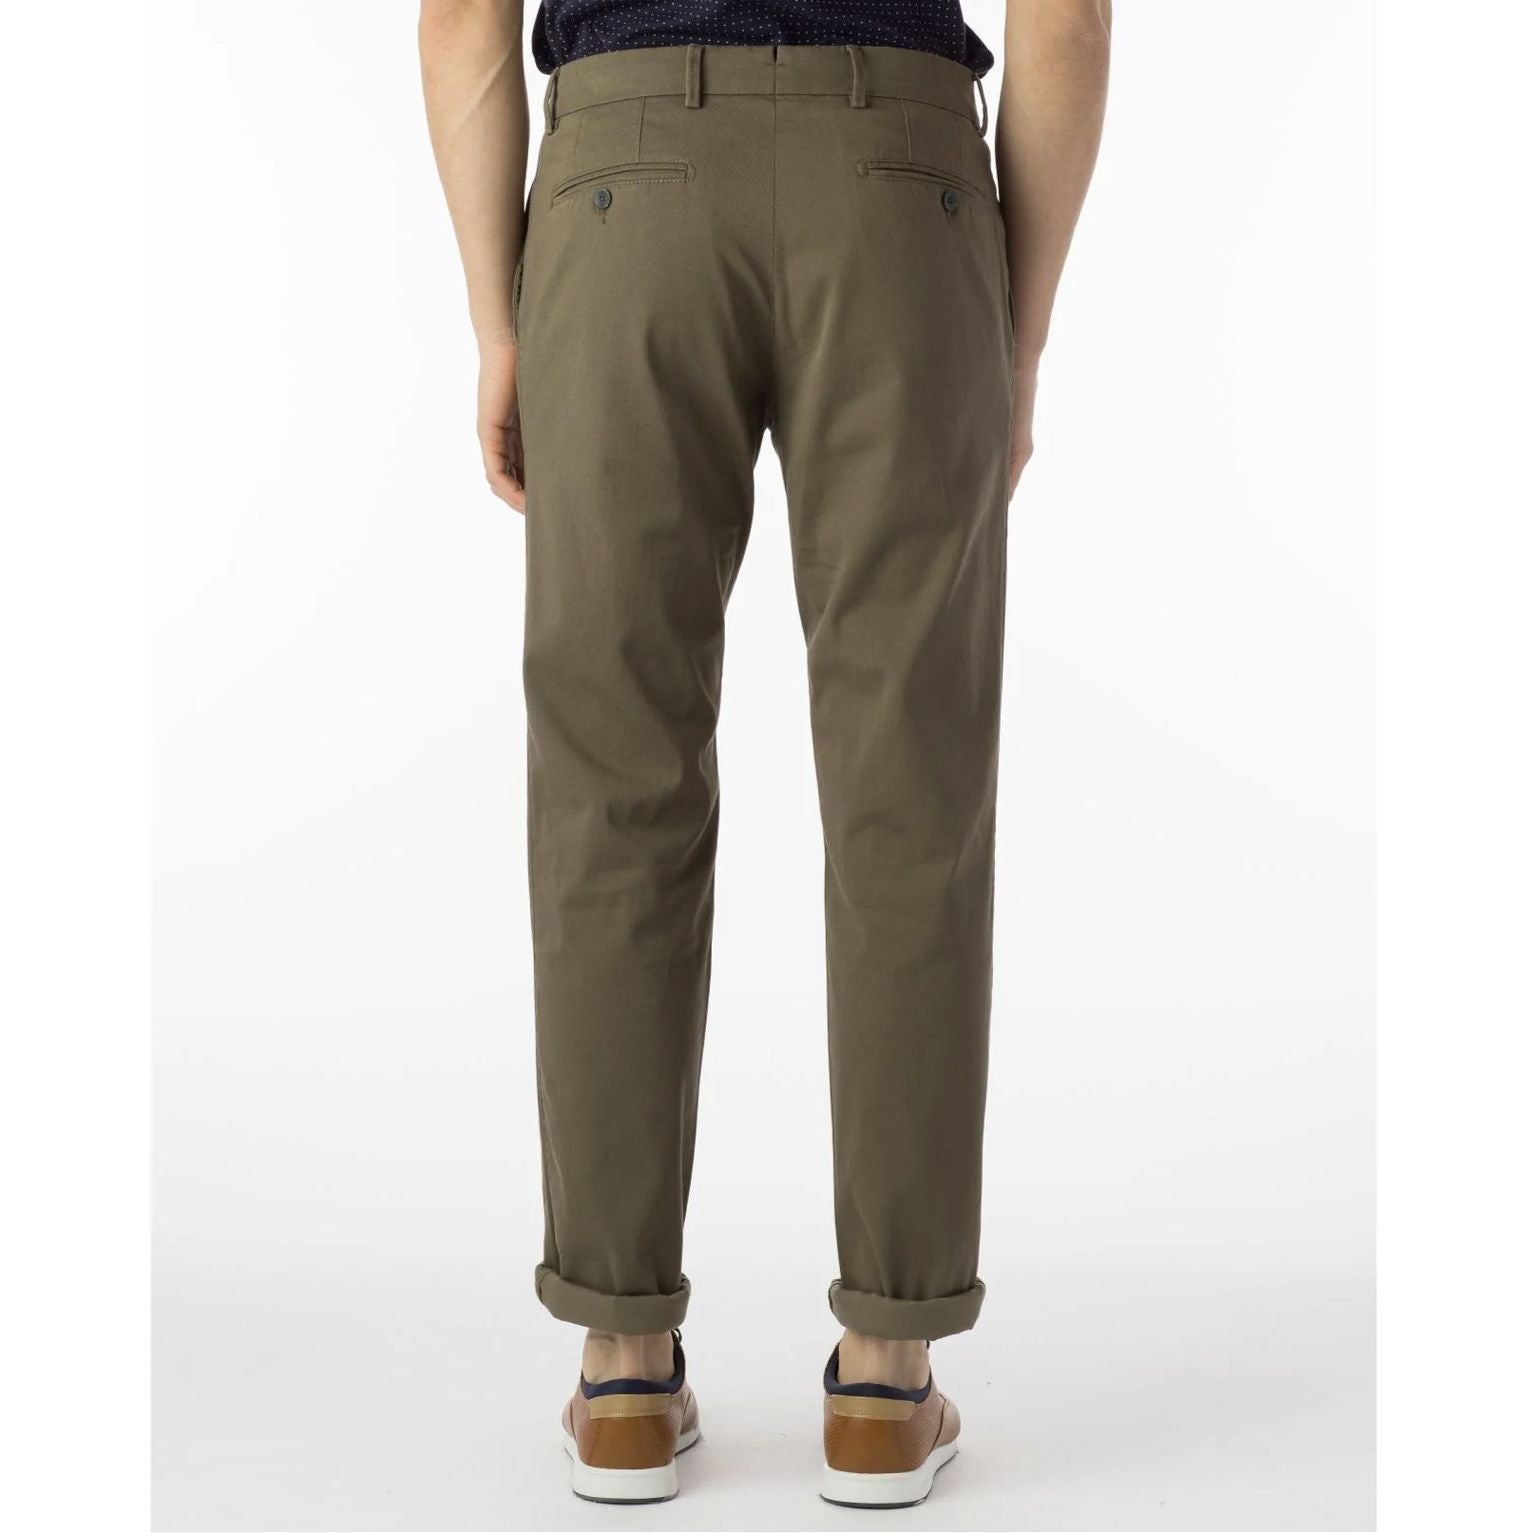 Perma Color Pima Twill Khaki Pants in Fatigue, Size 36 (Mansfield Relaxed Fit) by Ballin